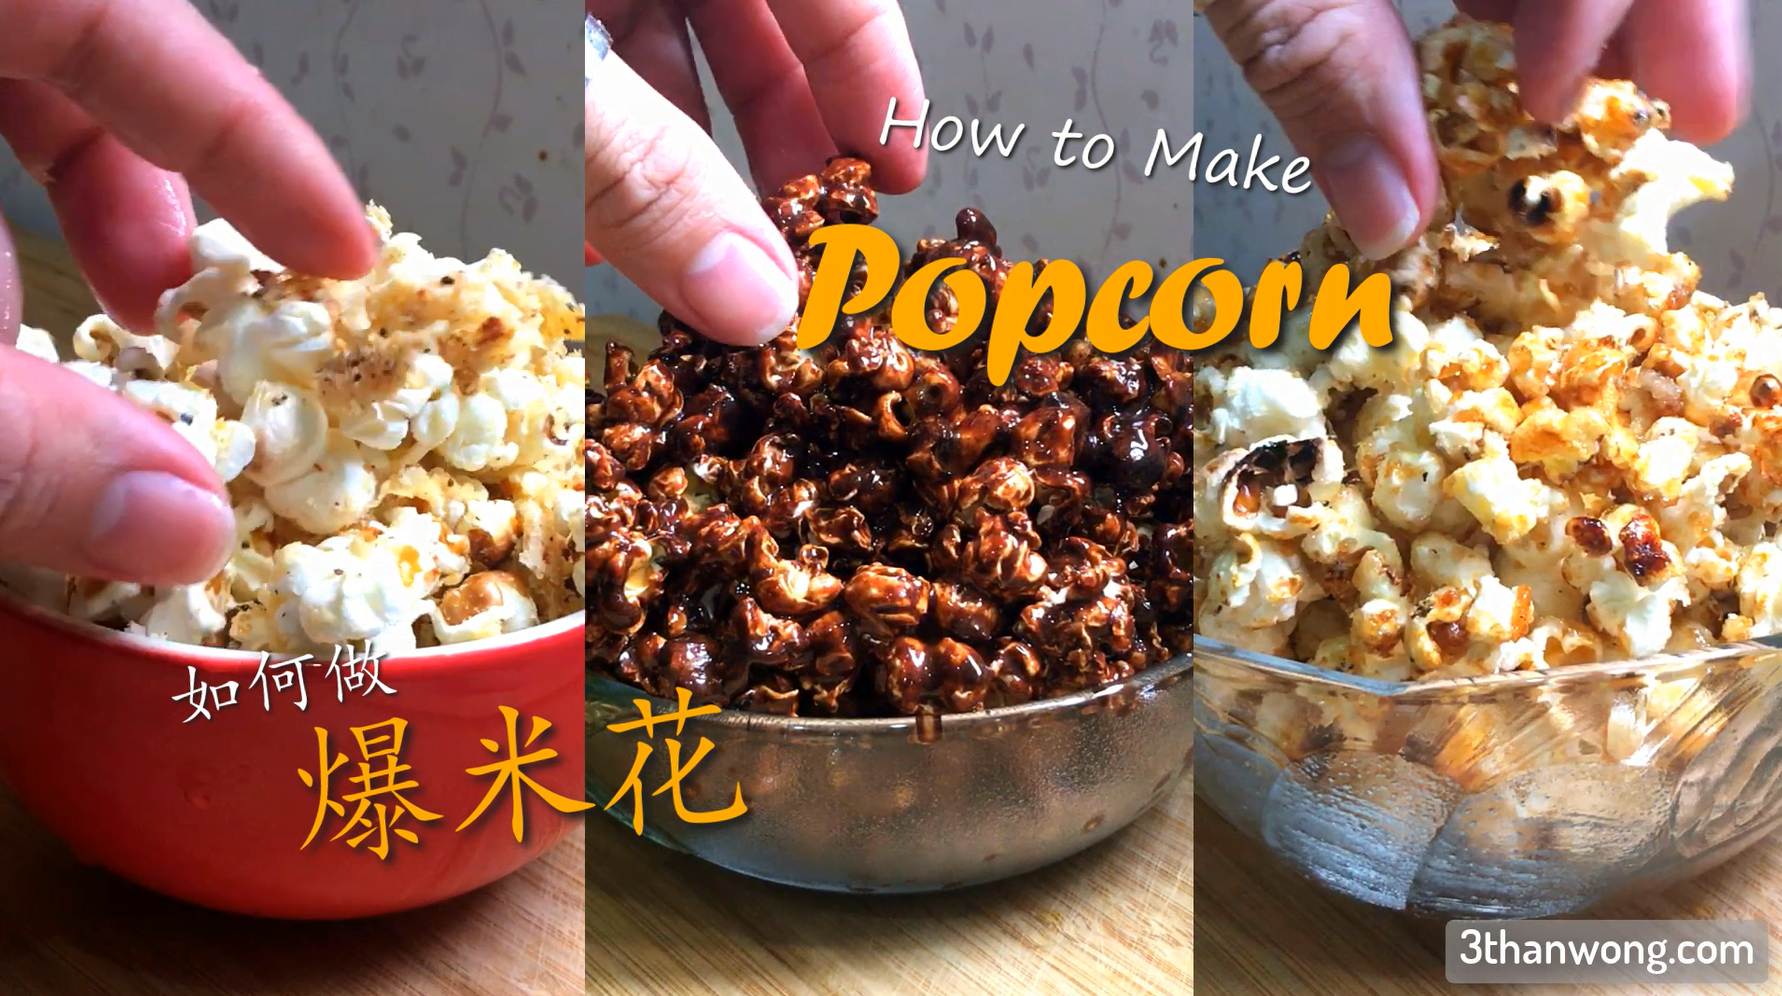 How to Make Popcorn on the Stove in 5 Minutes